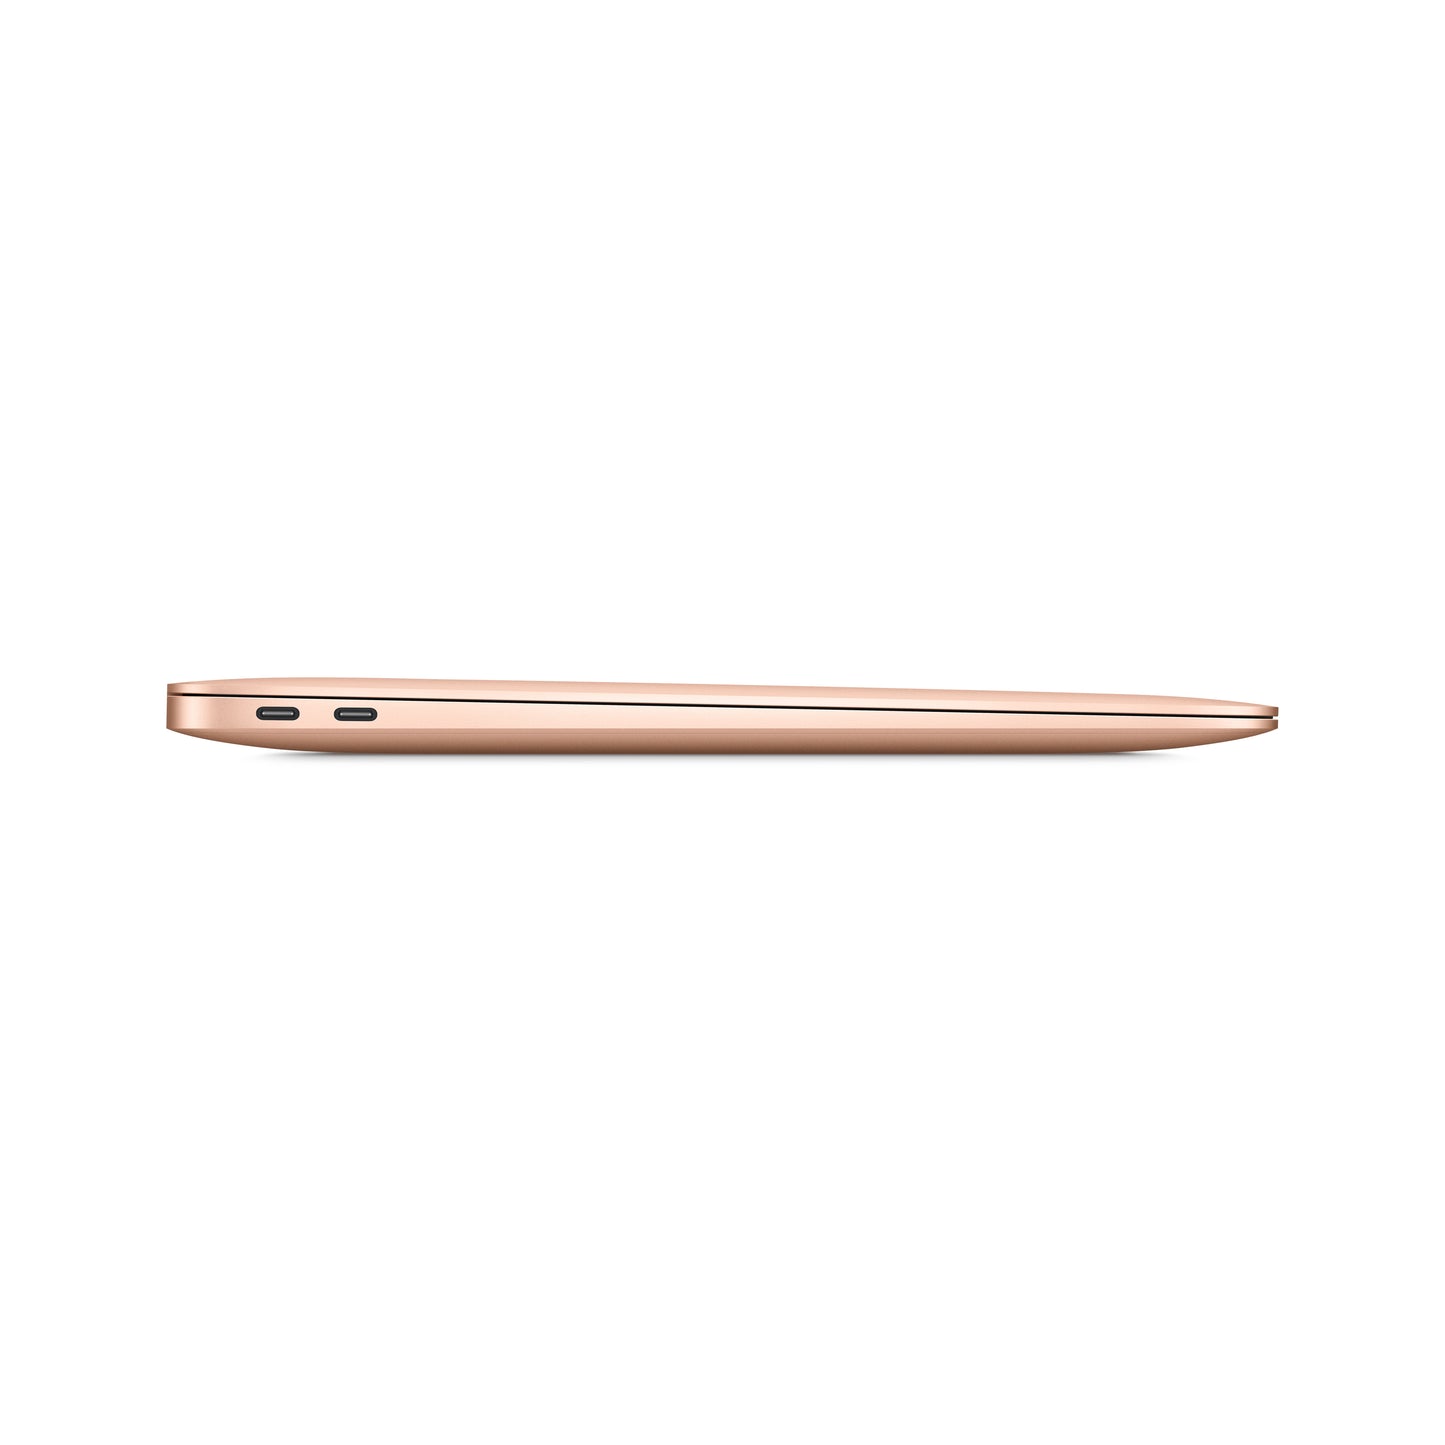 Apple MacBook Air with M1 chip | Gold